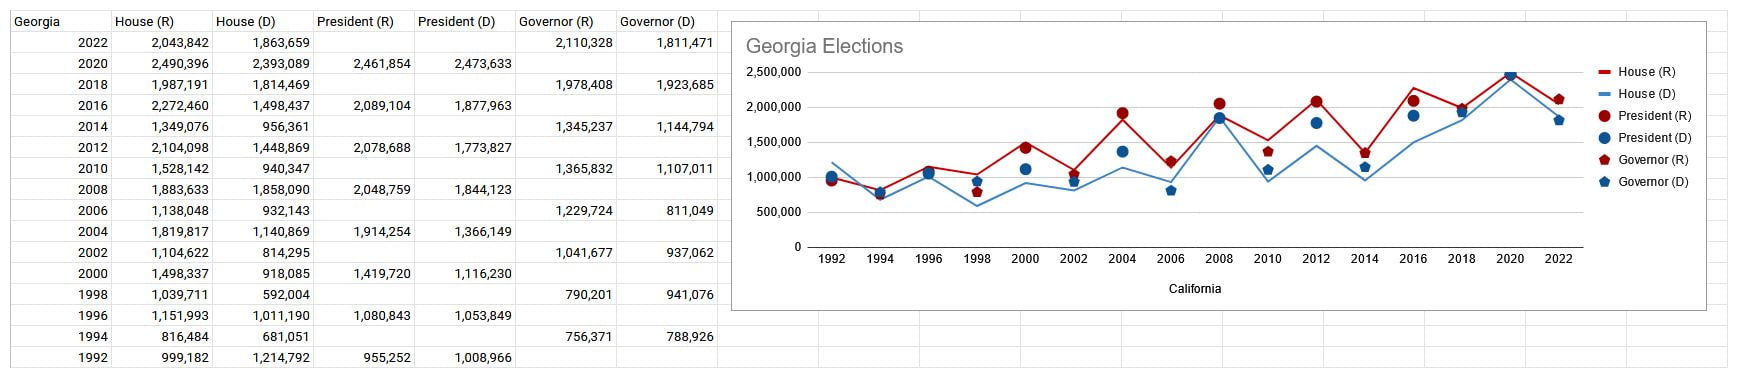 Historical vote data for battlegrounds and other states of...